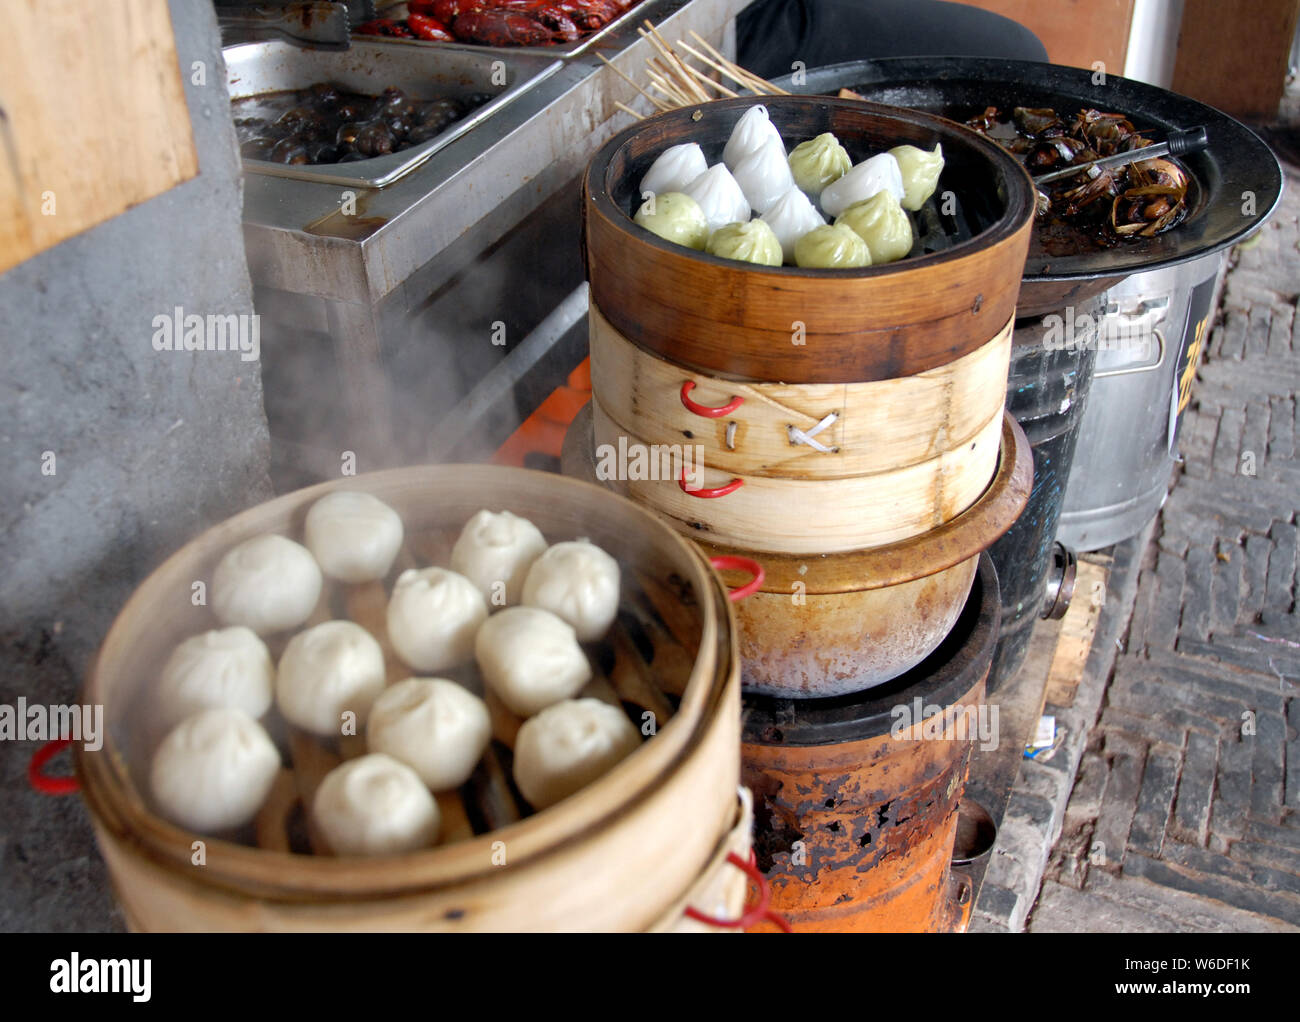 Chinese dumplings in Xitang water town near Shanghai. This is typical Chinese street food. These steamed dumplings are popular in China. Xitang, China Stock Photo